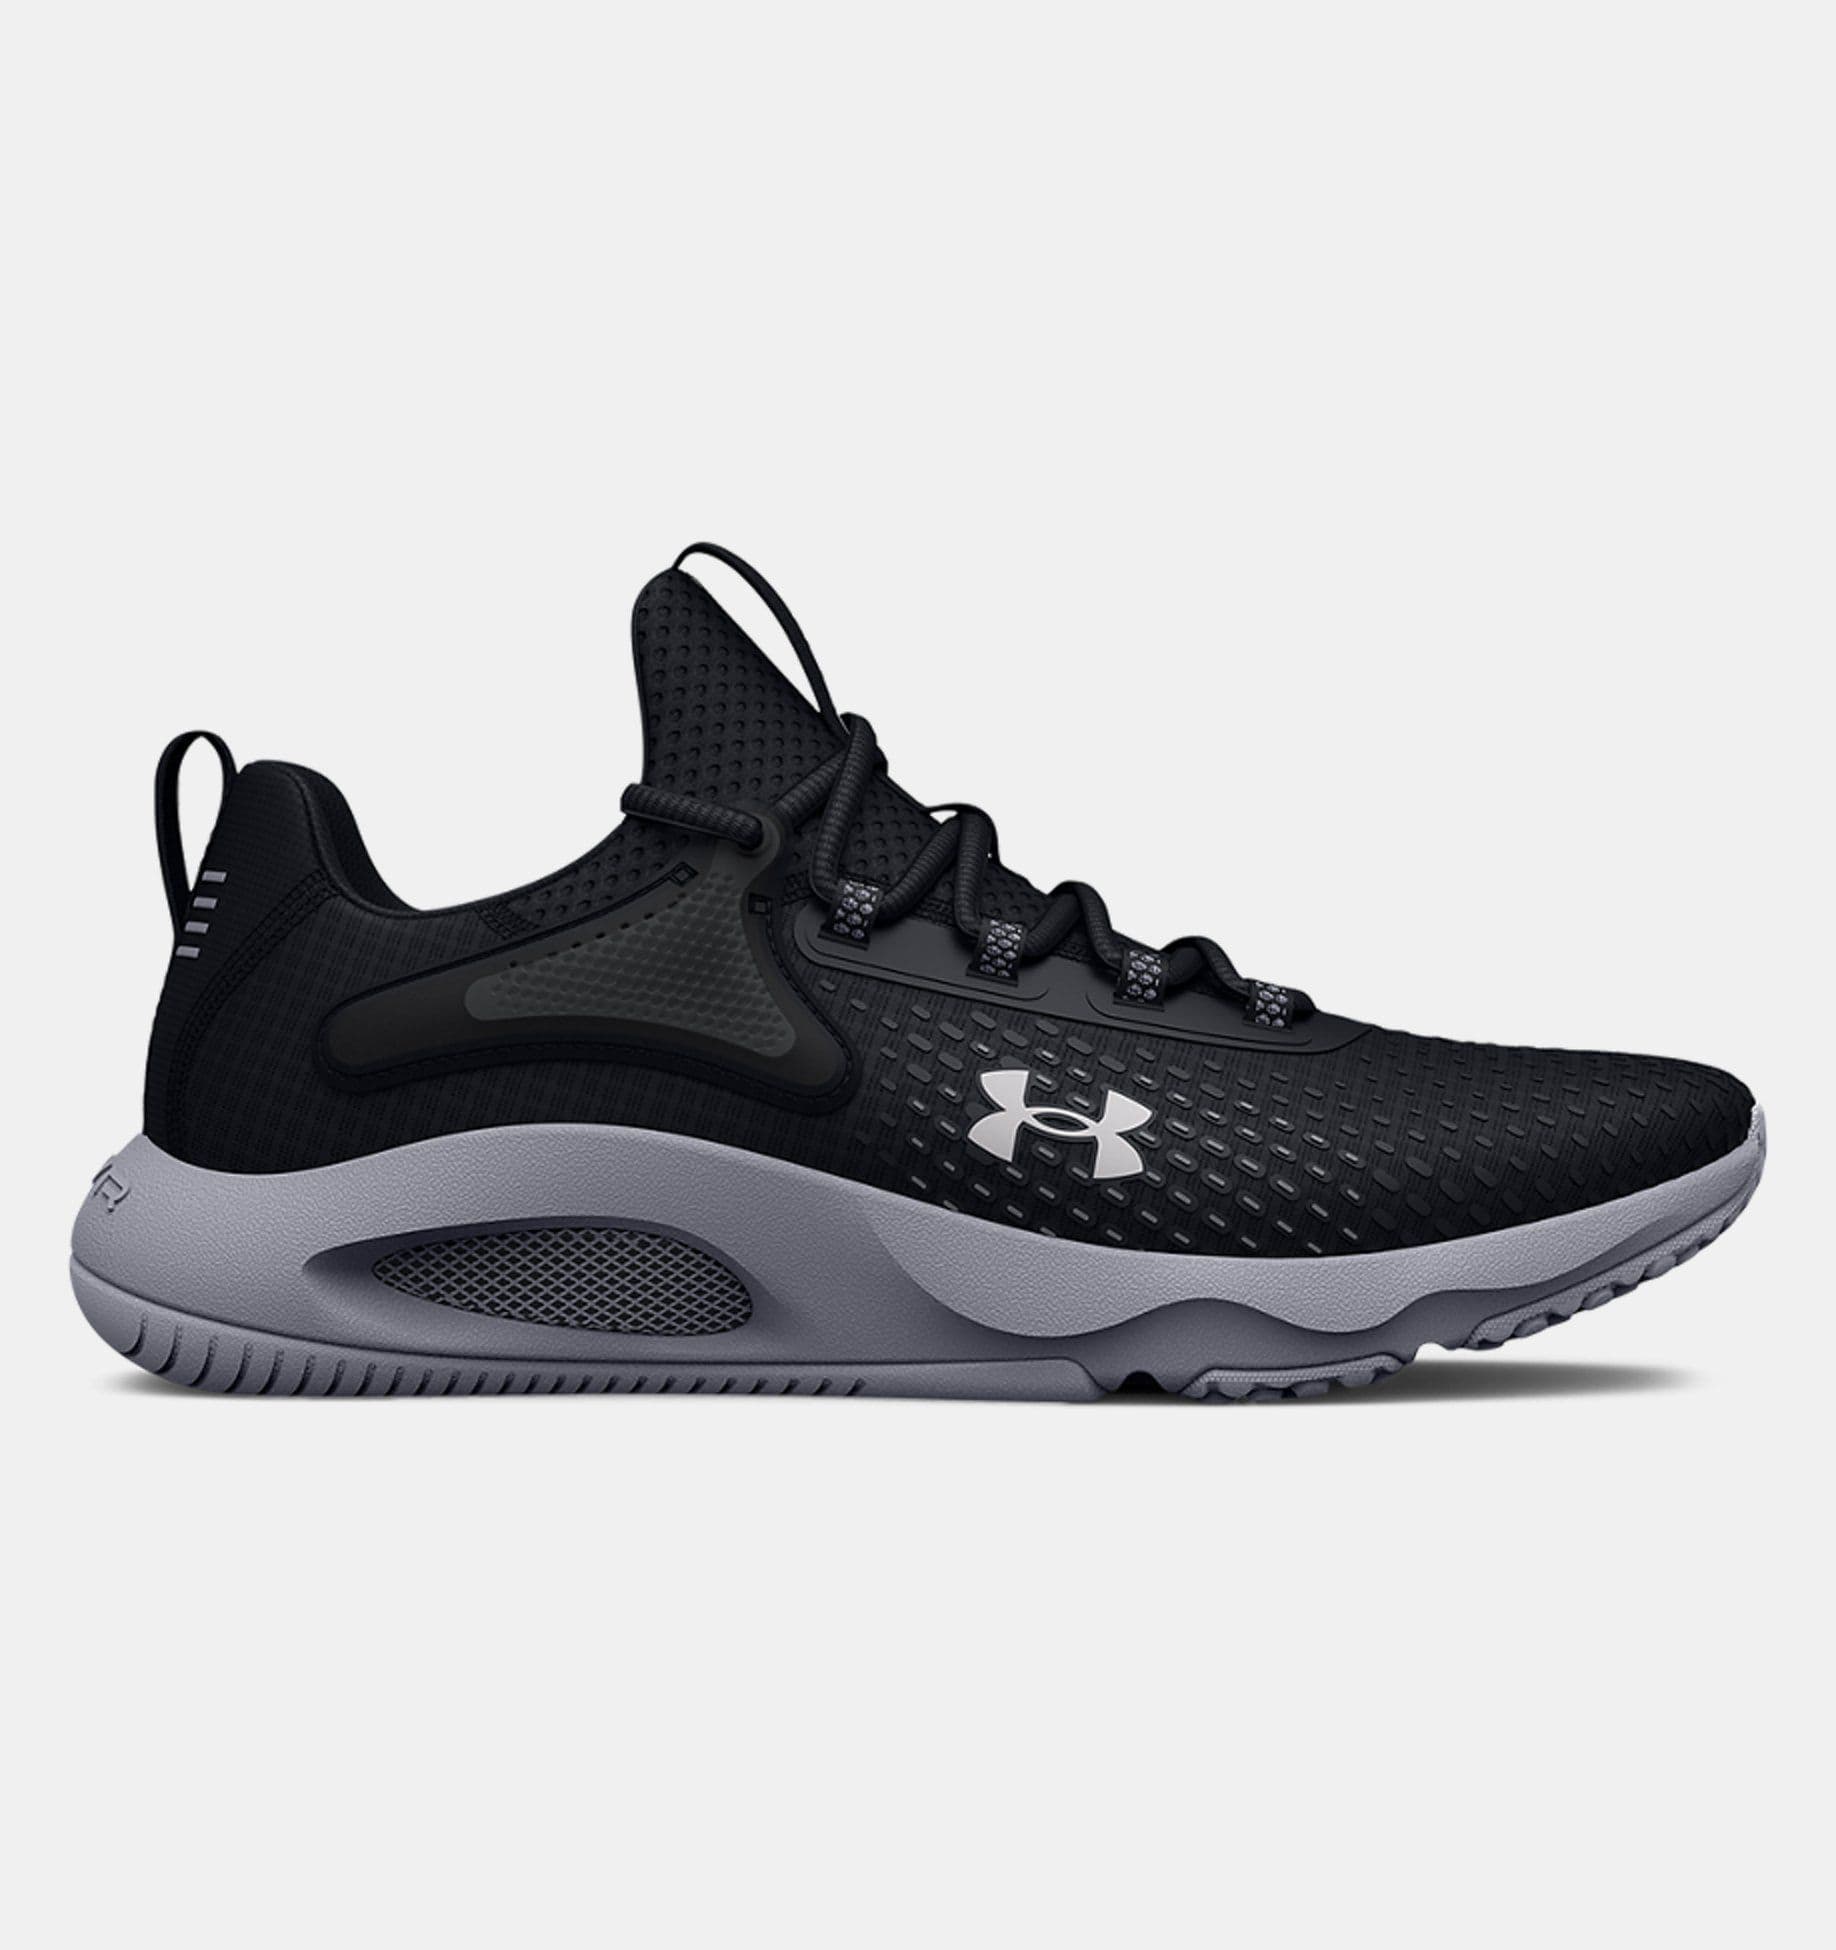 Under Armour HOVR Rise 4 Trainer Black